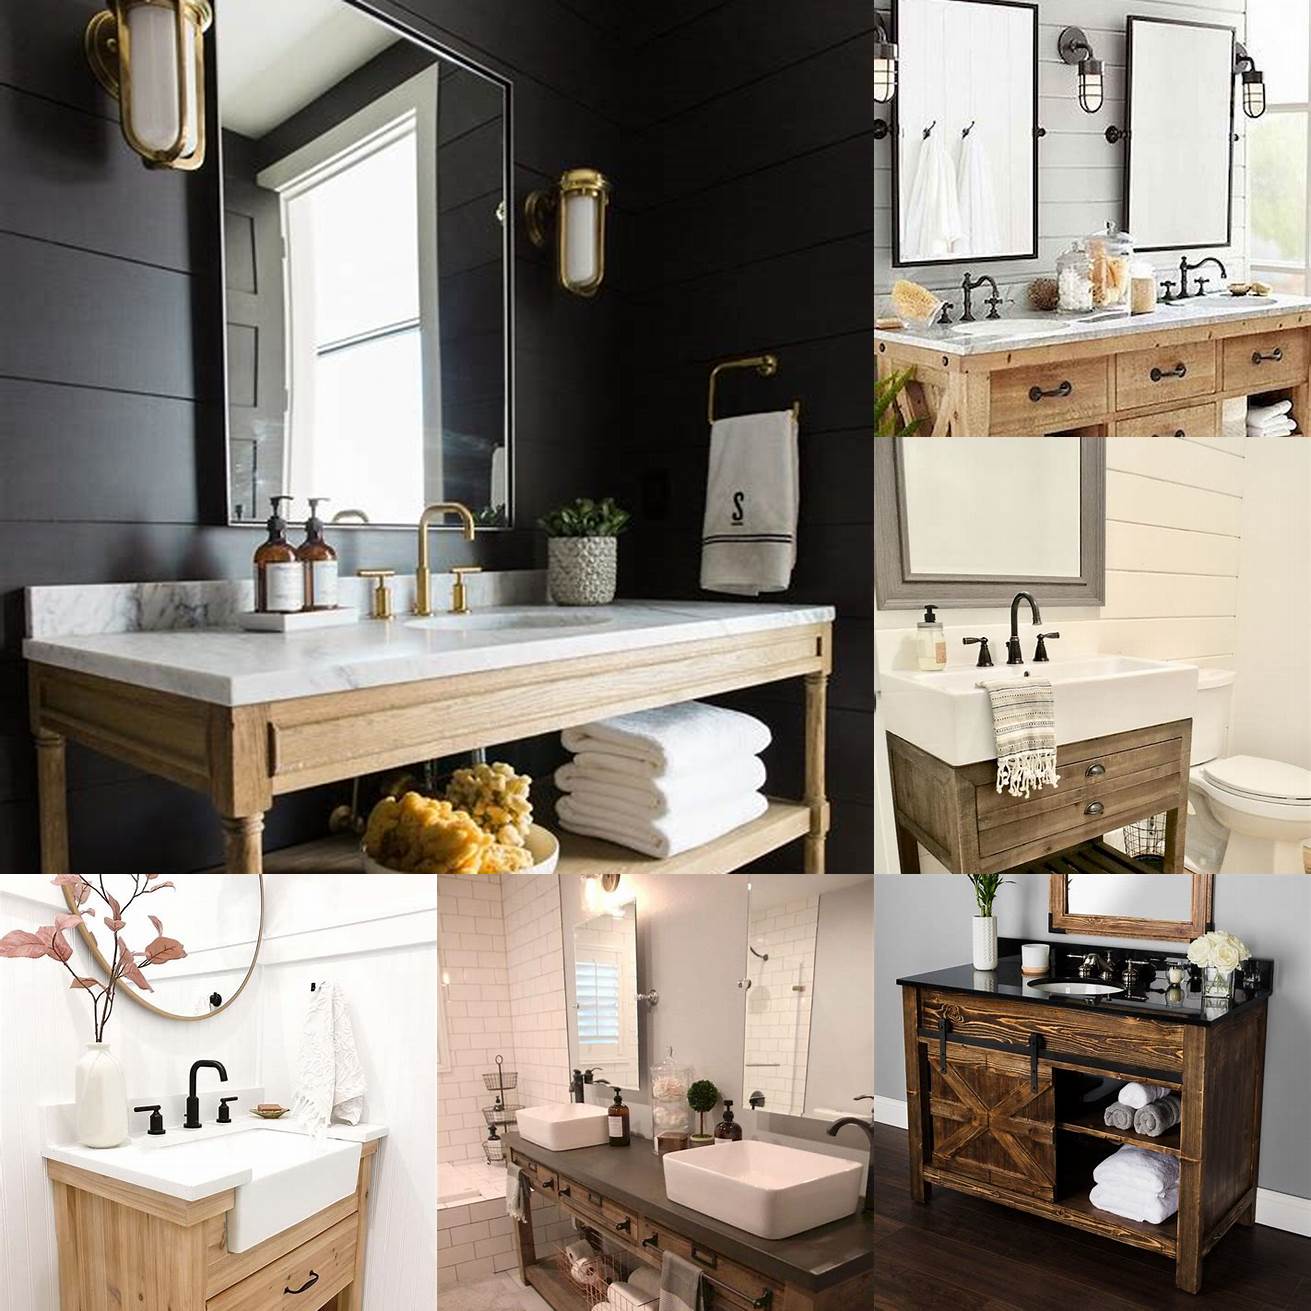 Farmhouse-style vanity with open shelving